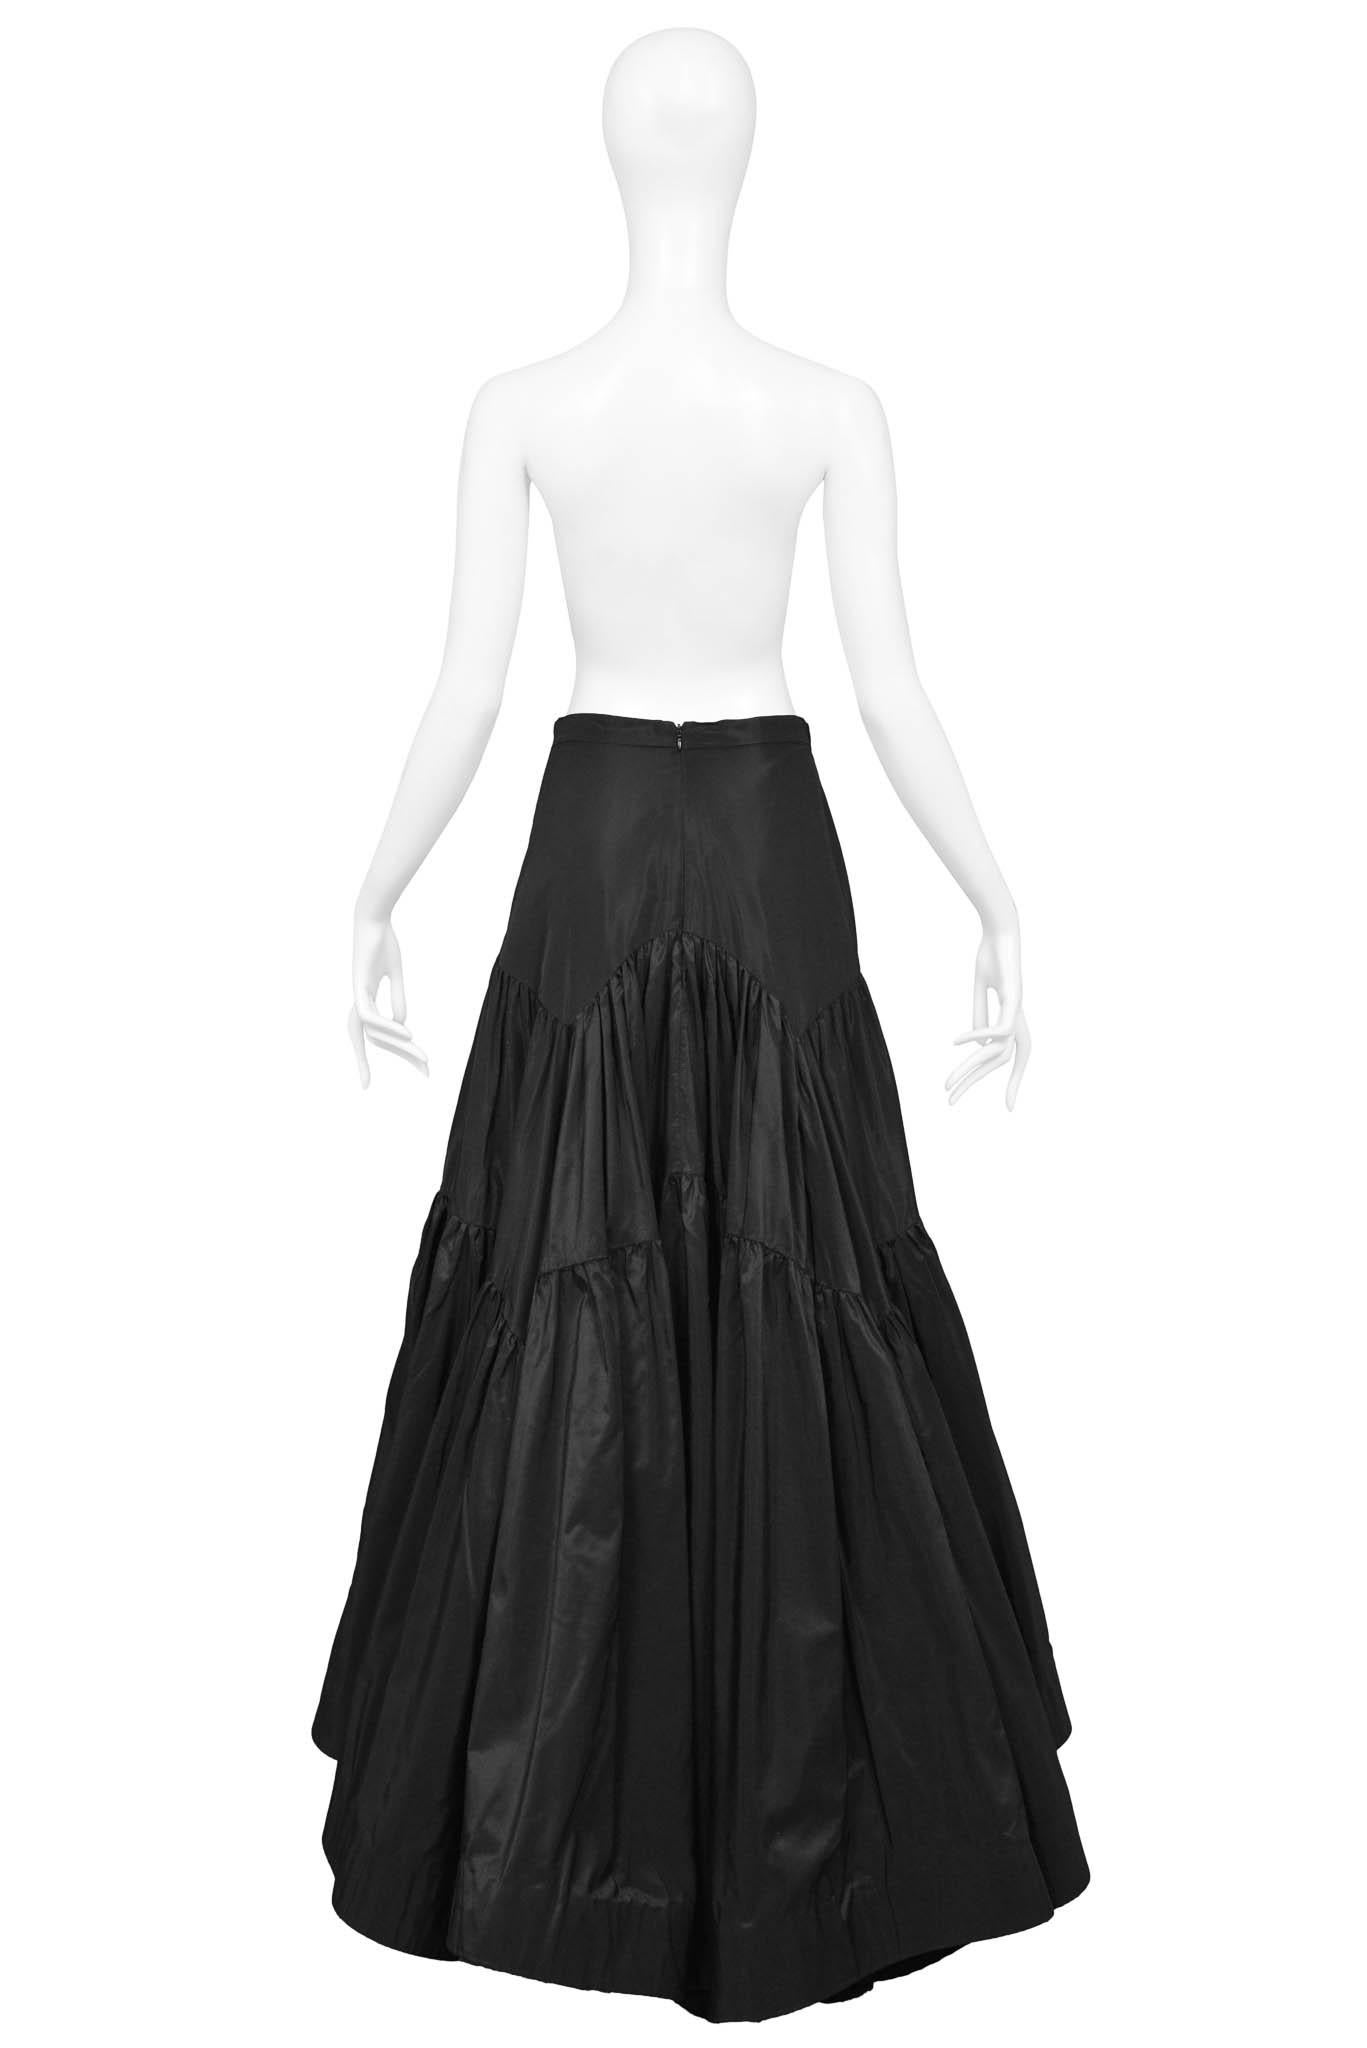 Katy Rodriguez Black Ball Gown Skirt For Sale 2